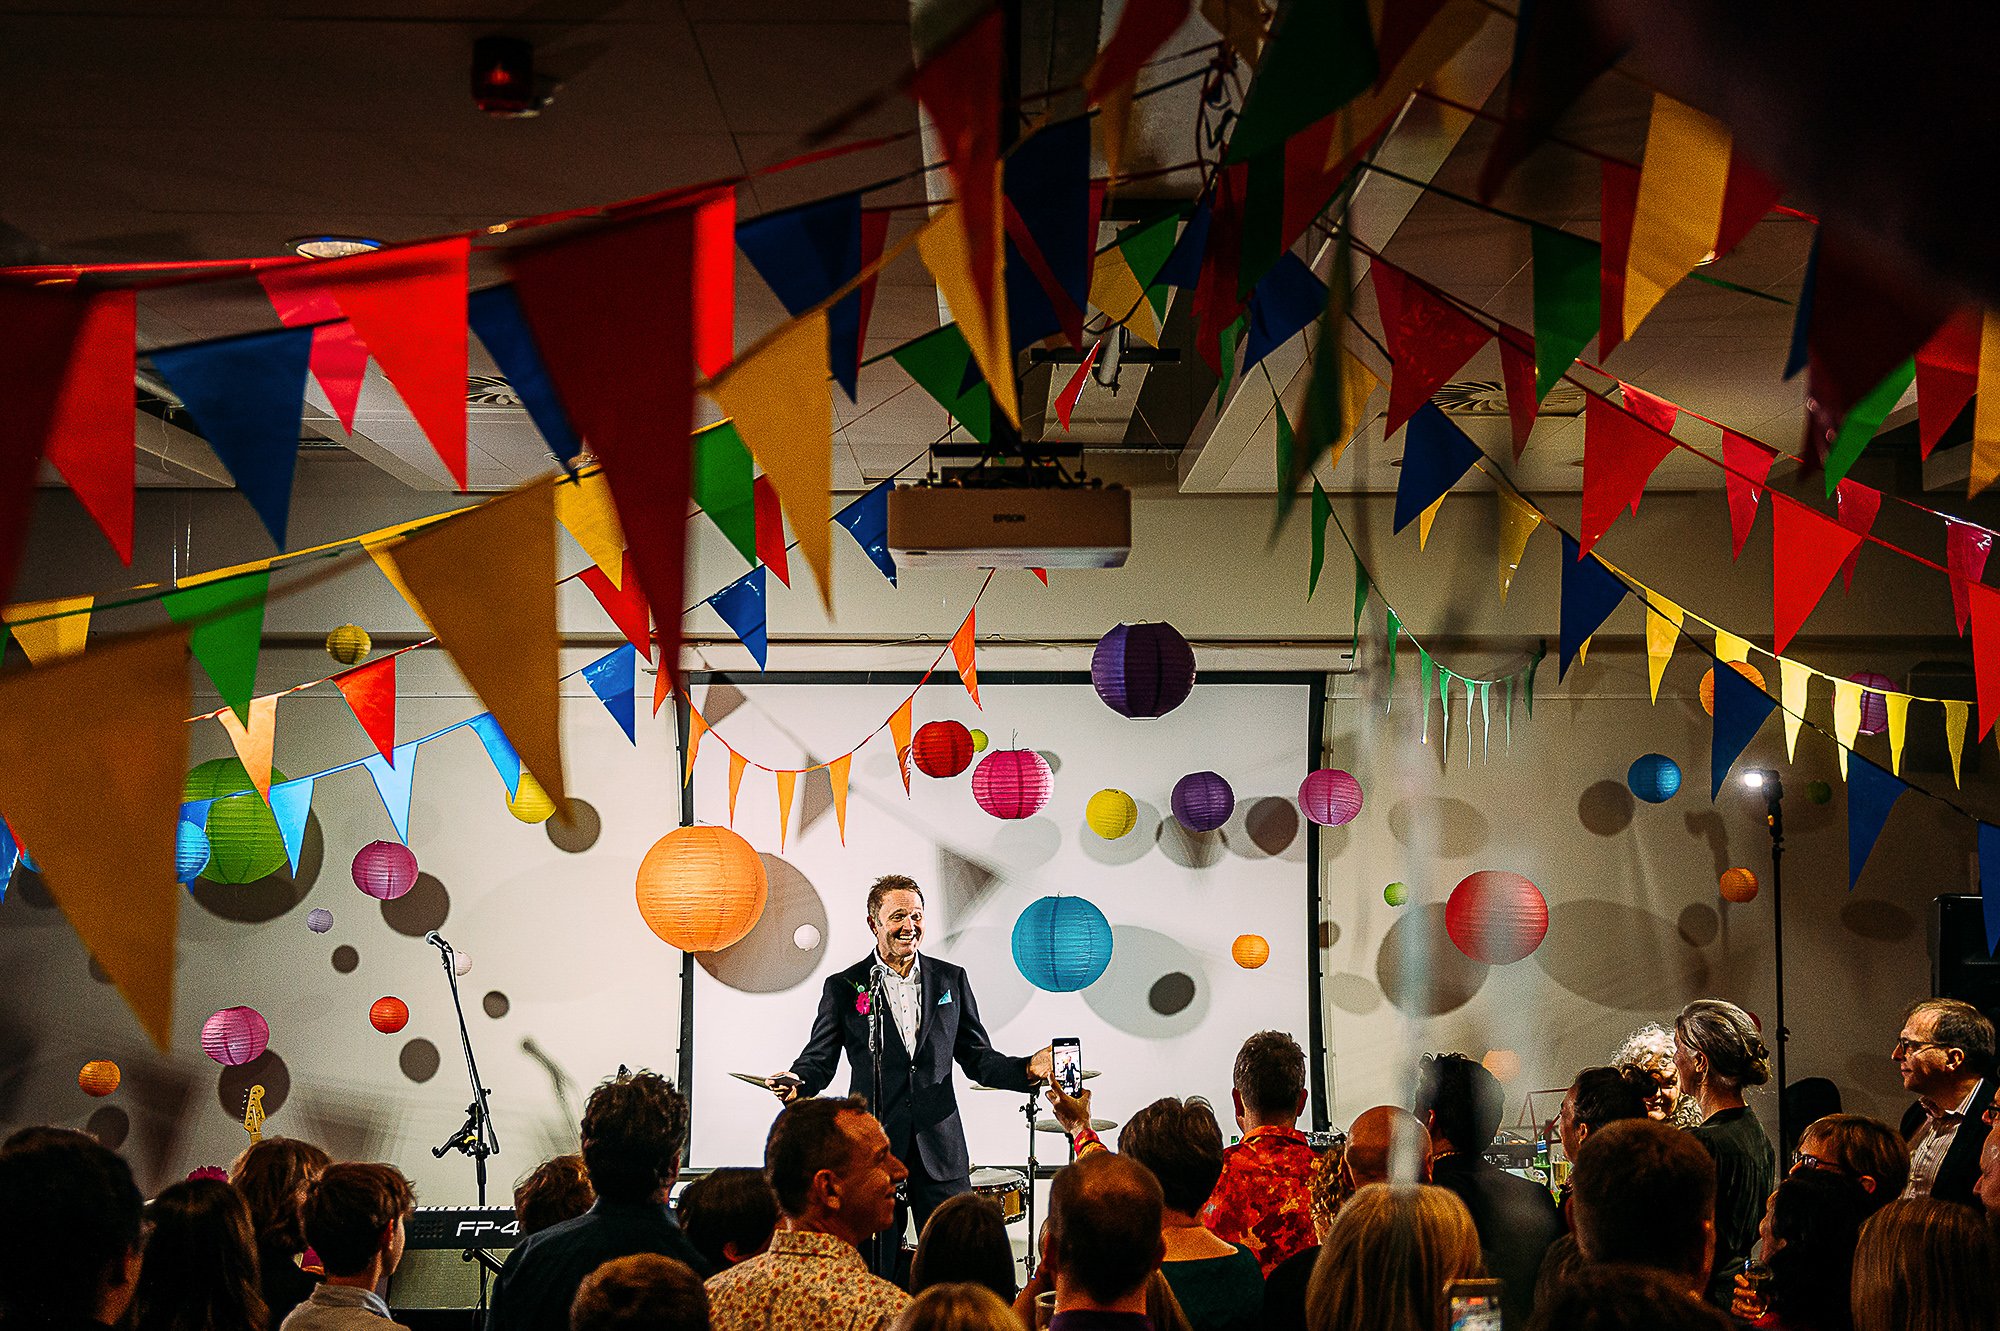  Groom speech in a room filled with flags and balloons. 